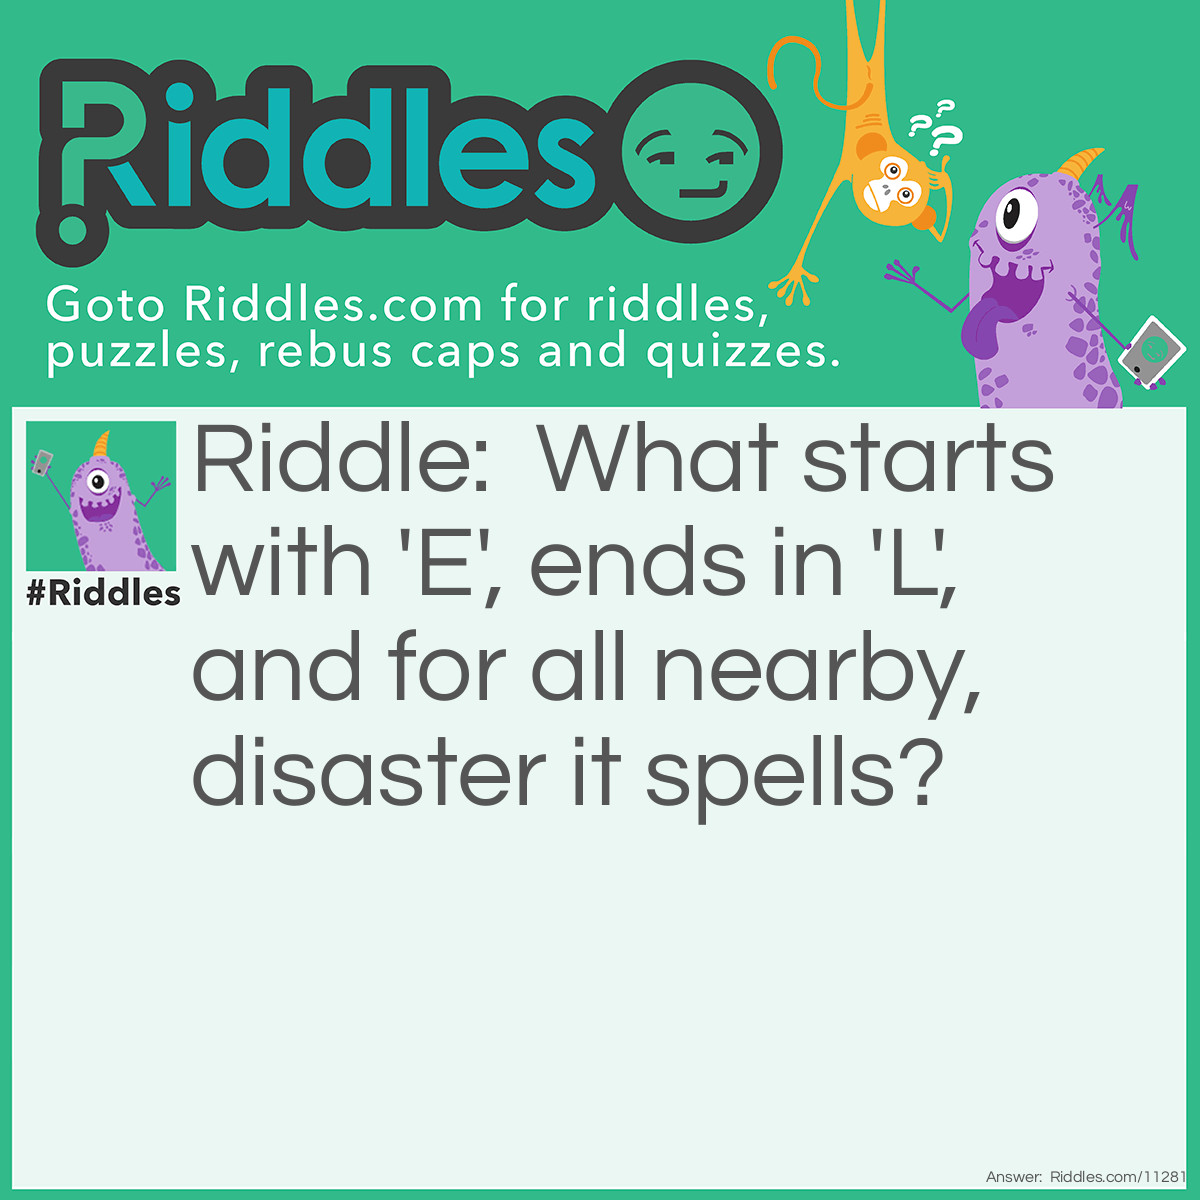 Riddle: What starts with 'E', ends in 'L', and for all nearby, disaster it spells? Answer: Evil.